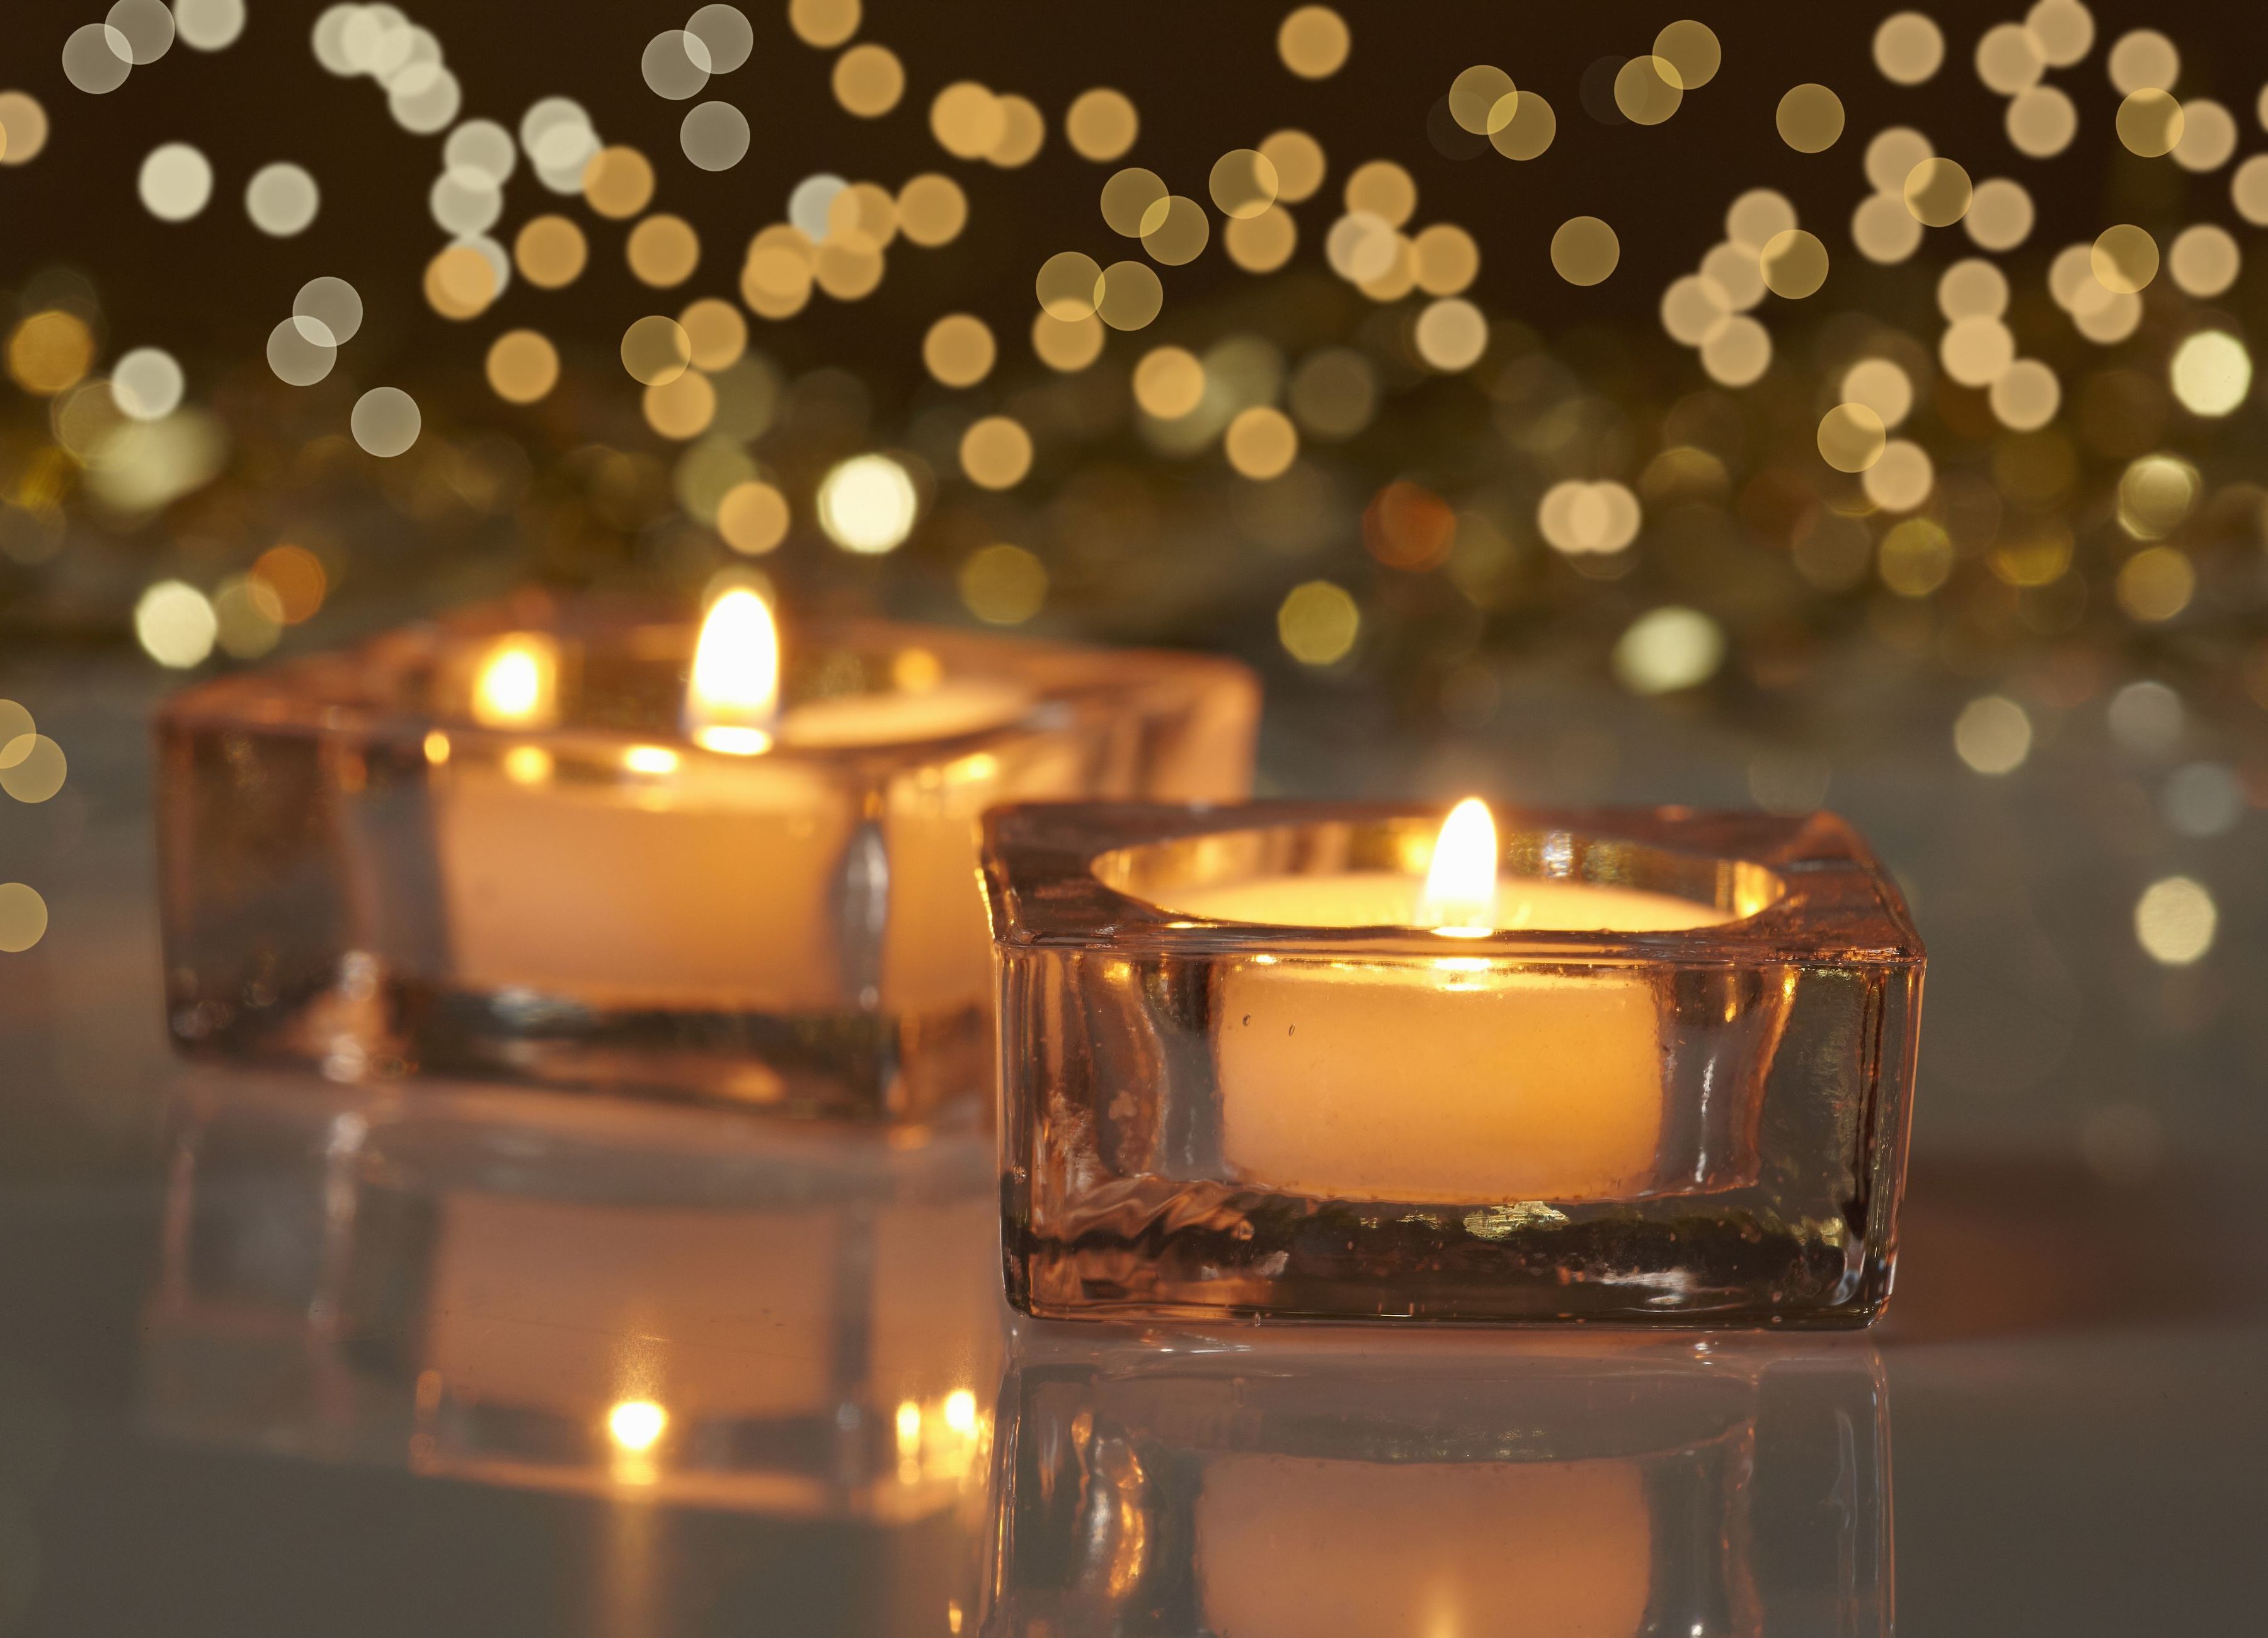 Download wallpaper reflection, background, Wallpaper, blur, wallpaper,  different, widescreen, background, bokeh, candle, full screen, HD wallpapers,  widescreen, candle. fire, section miscellanea in resolution 3600x2600